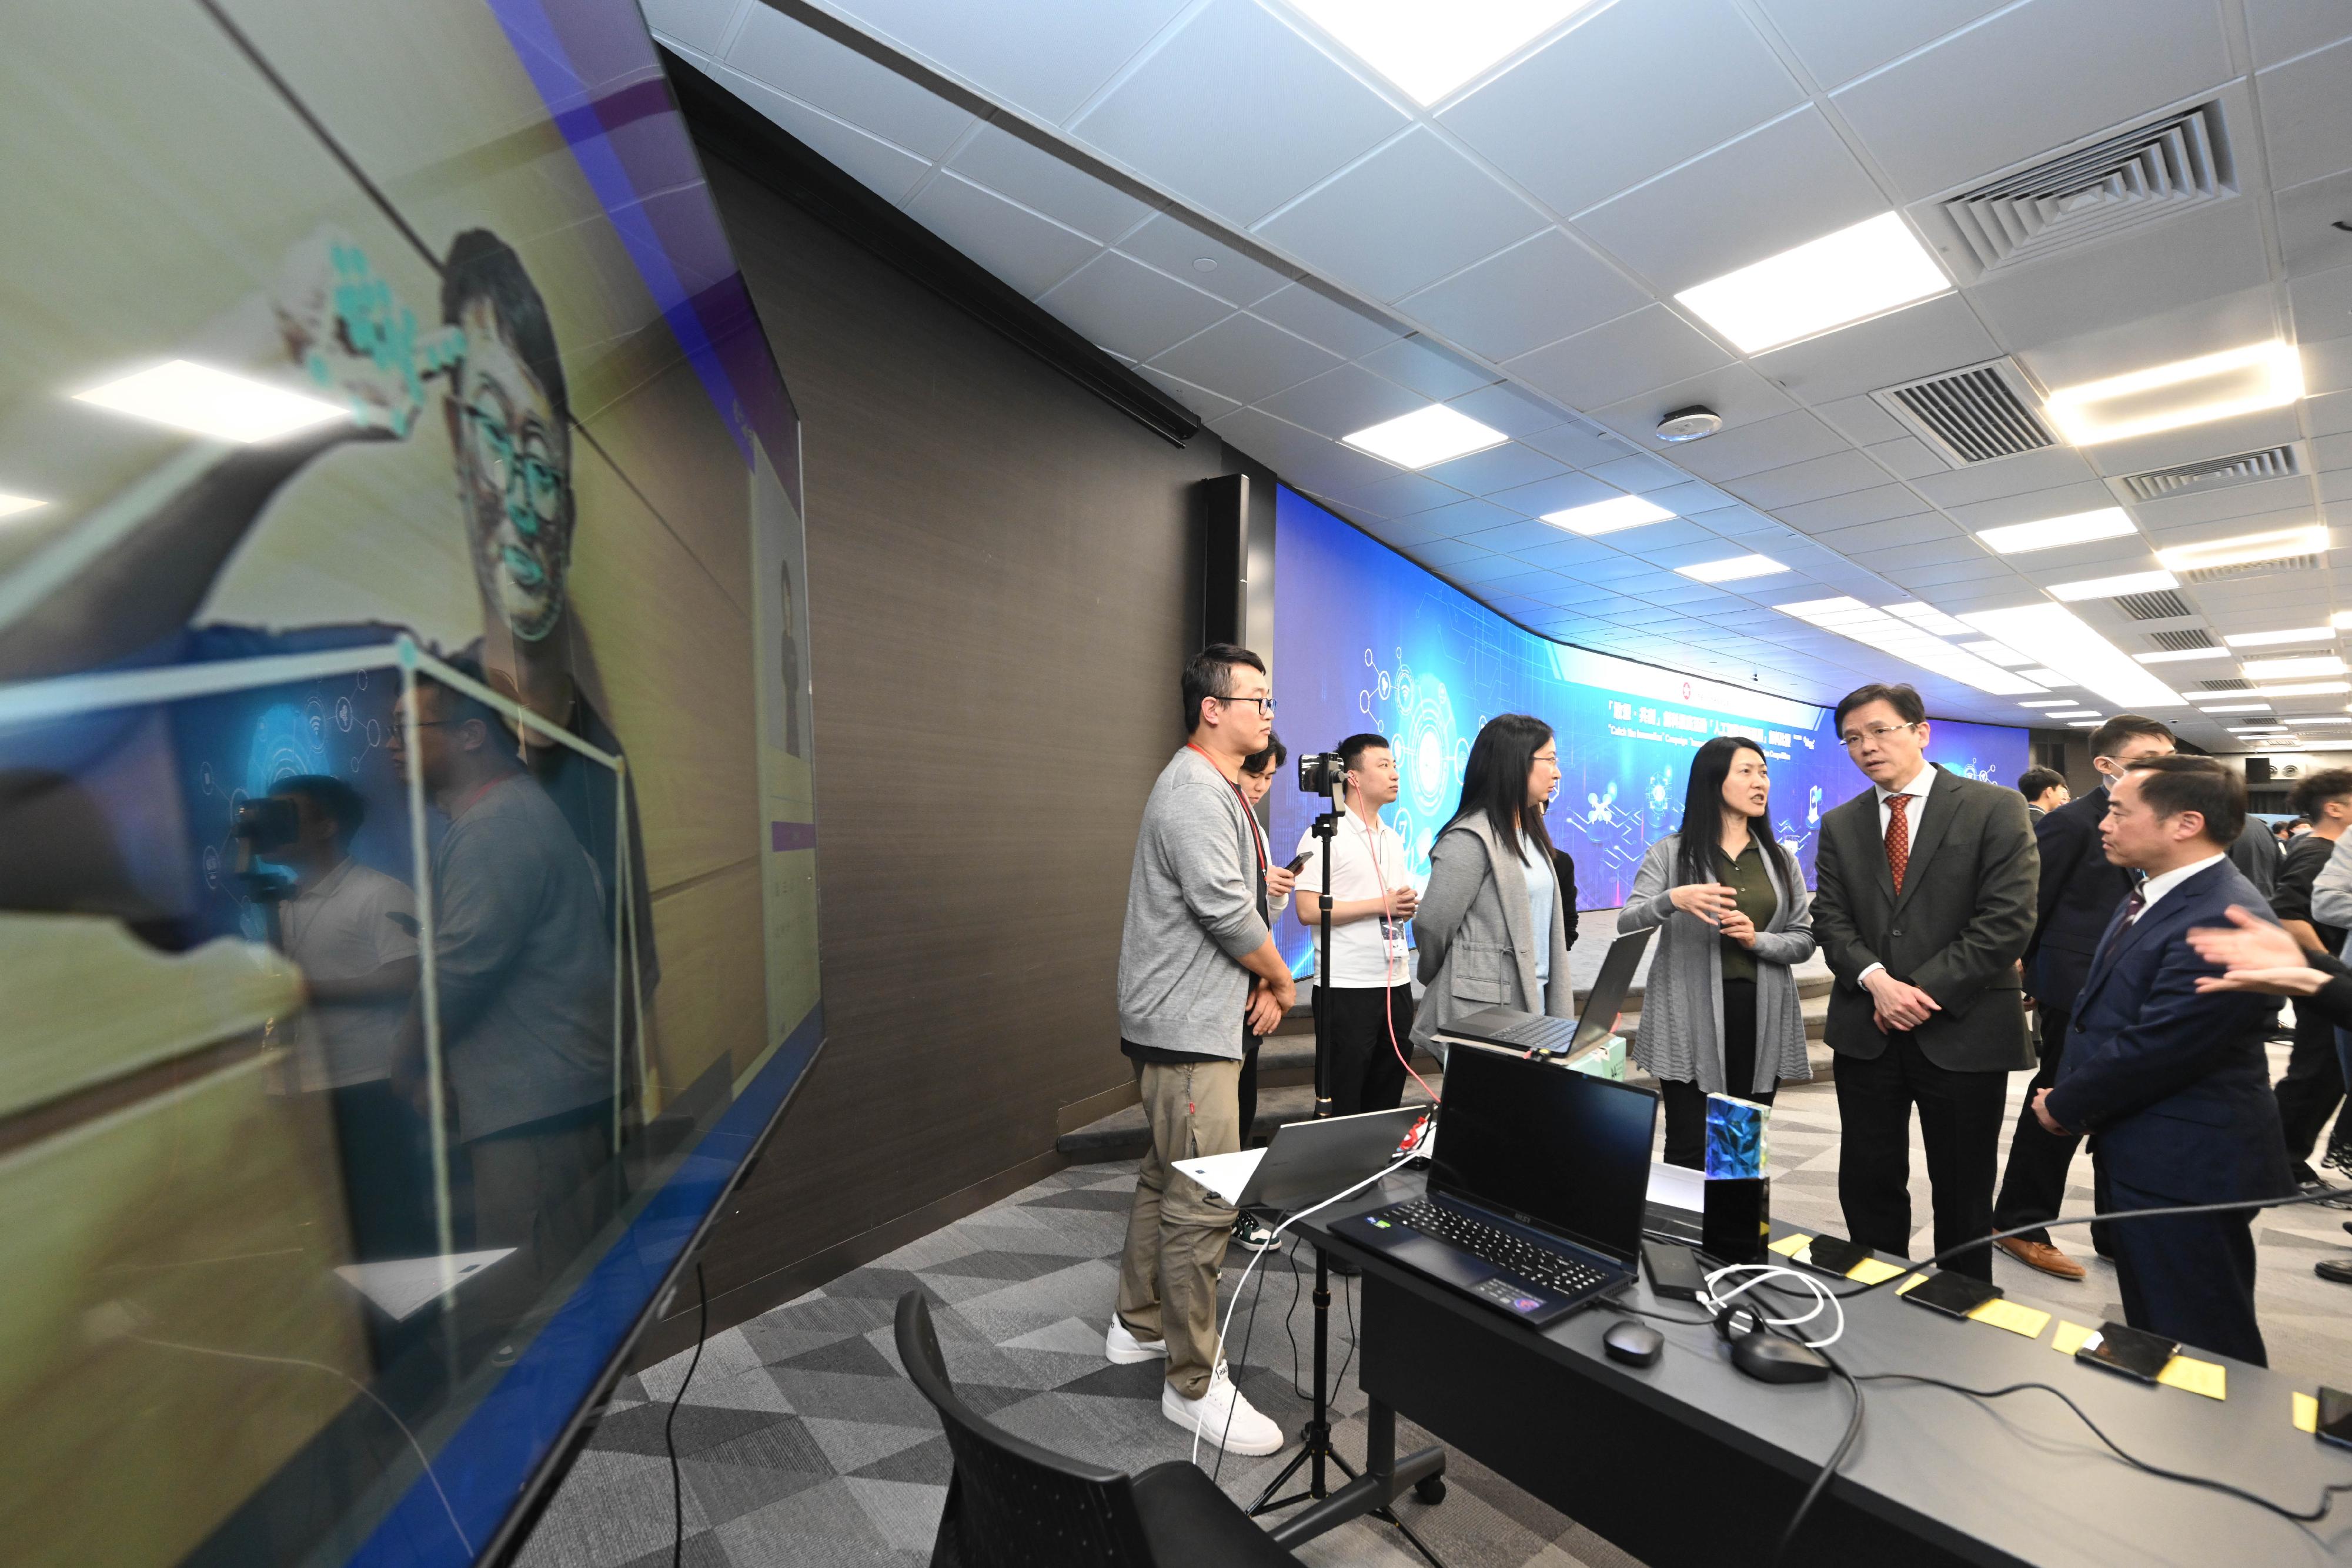 The Secretary for Innovation, Technology and Industry, Professor Sun Dong (second right), is briefed on the grand award project "Improving communications through generative sign language" at the Award Presentation Ceremony for the "Innovative Application with AI" Innovation Competition today (March 15). Looking on is the Government Chief Information Officer, Mr Tony Wong (first right).